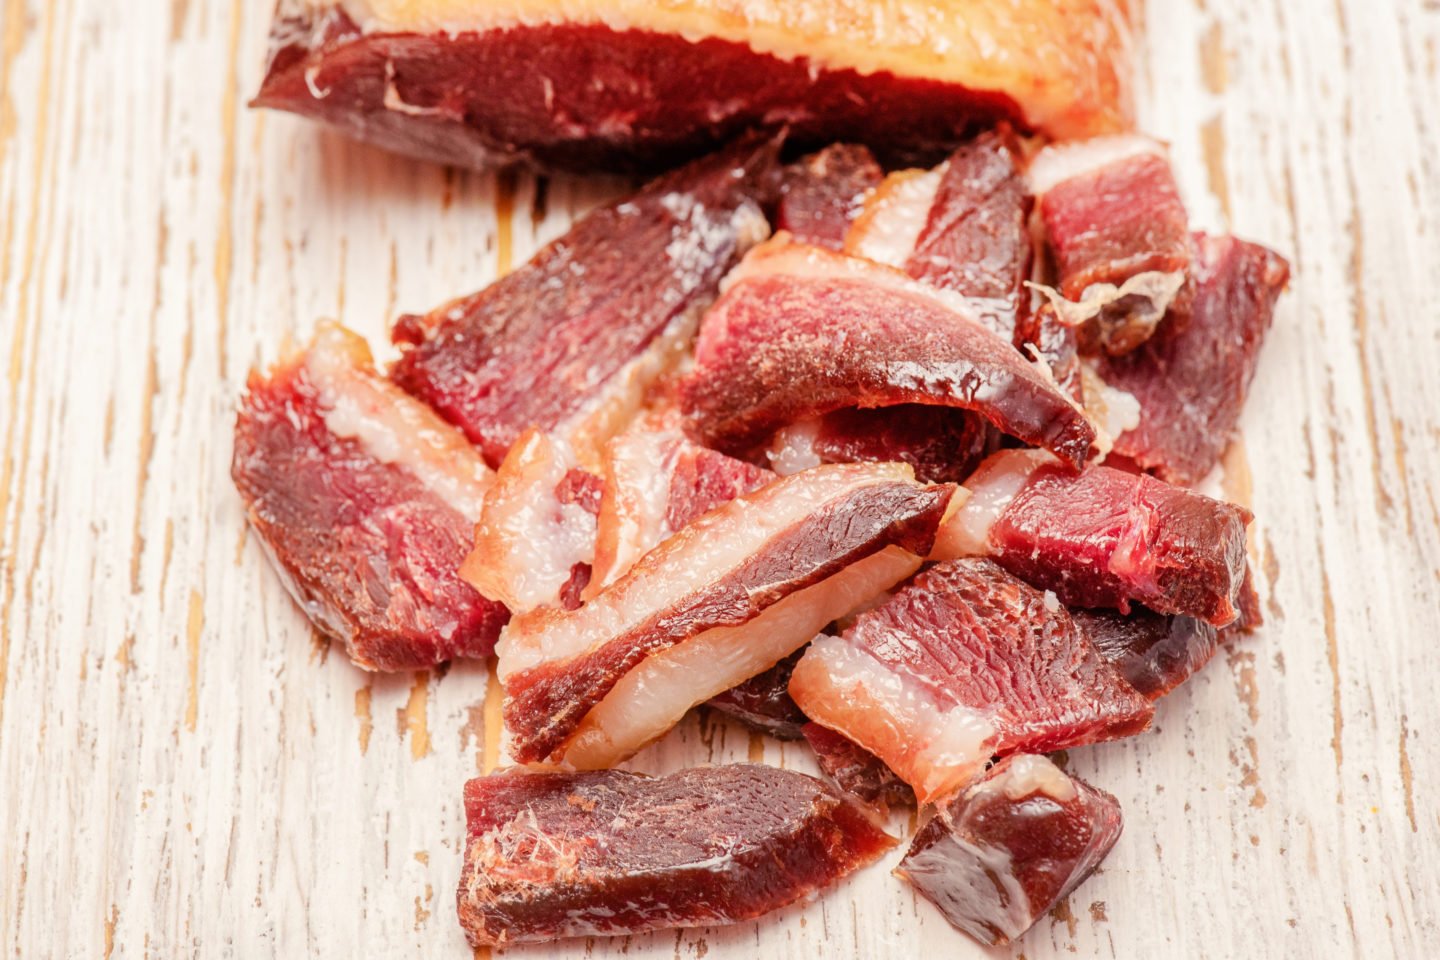 duck prosciutto slices on wooden surface